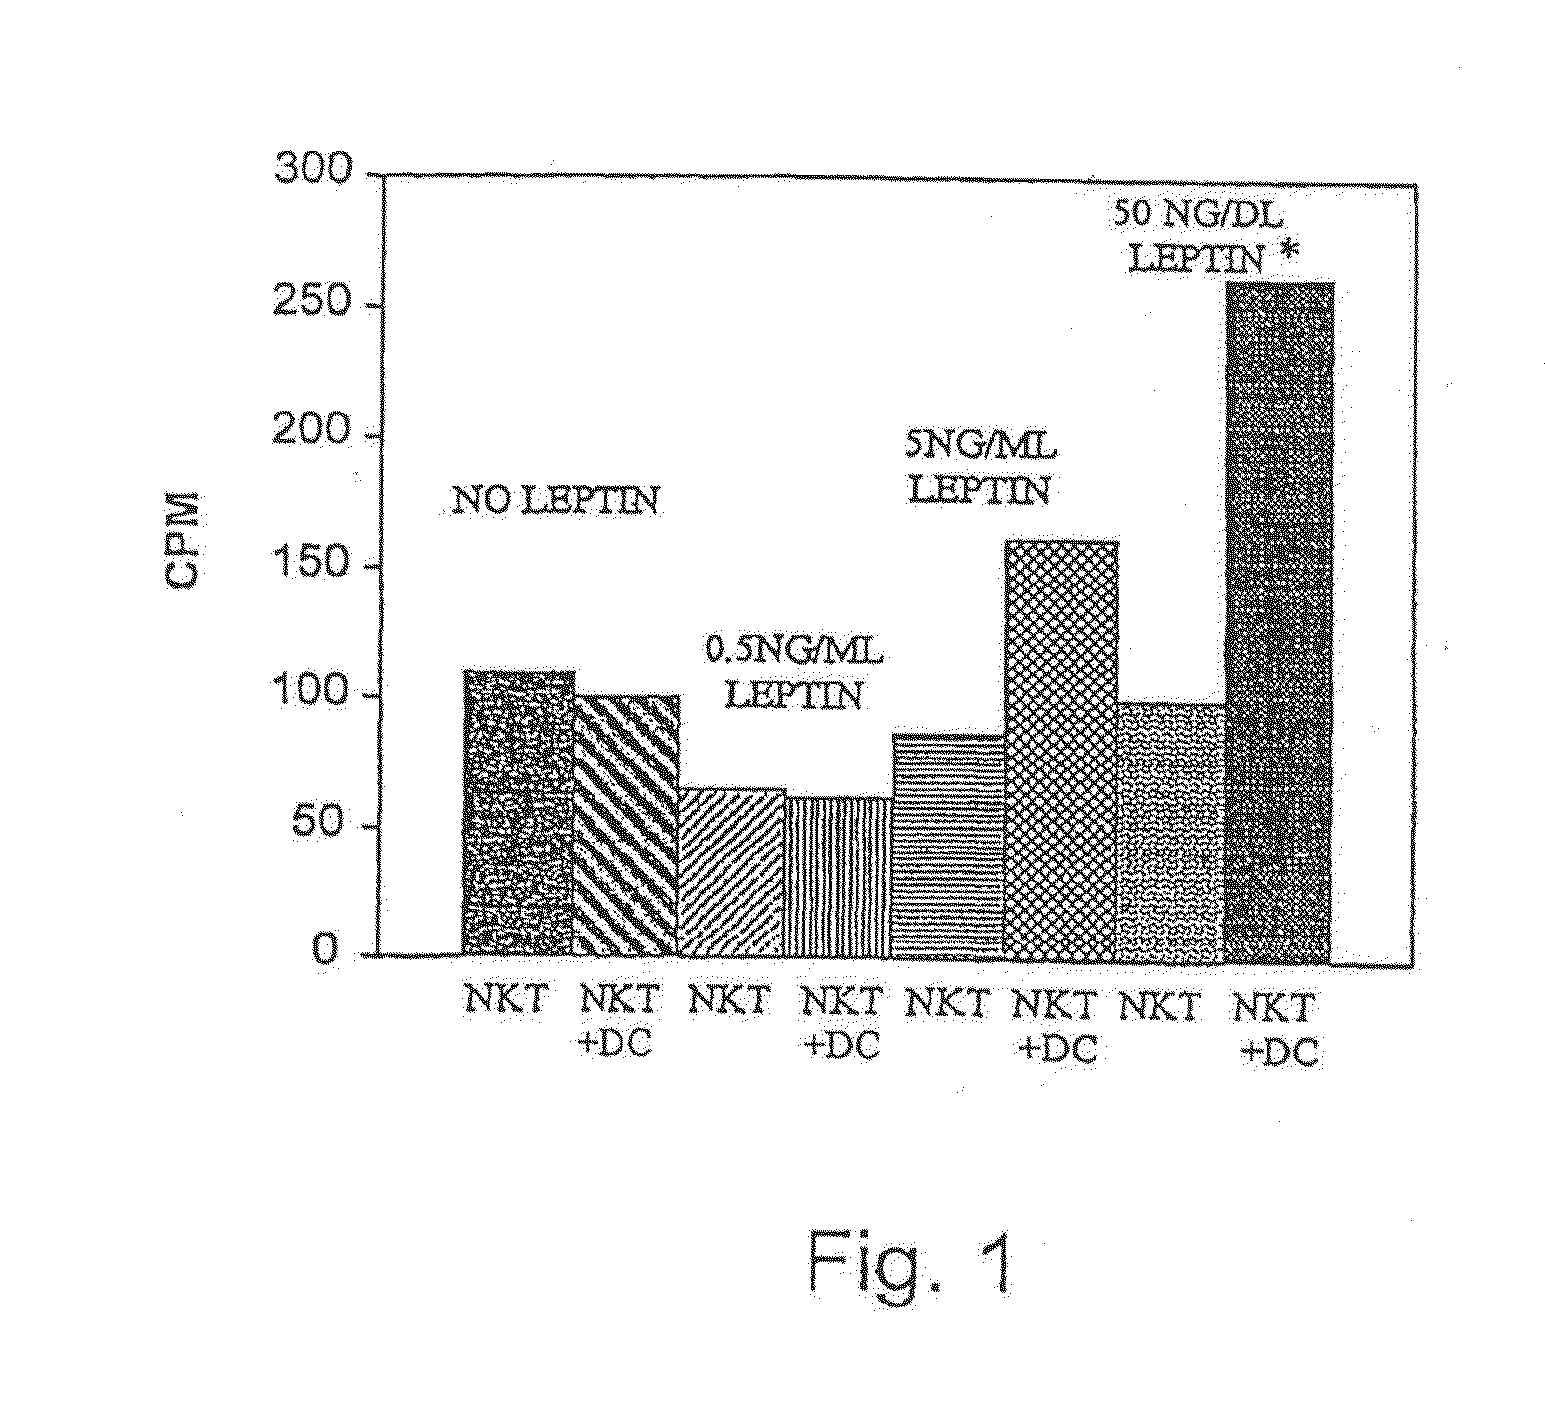 Methods and uses of leptin in immune modulation and hepatocellular carcinoma